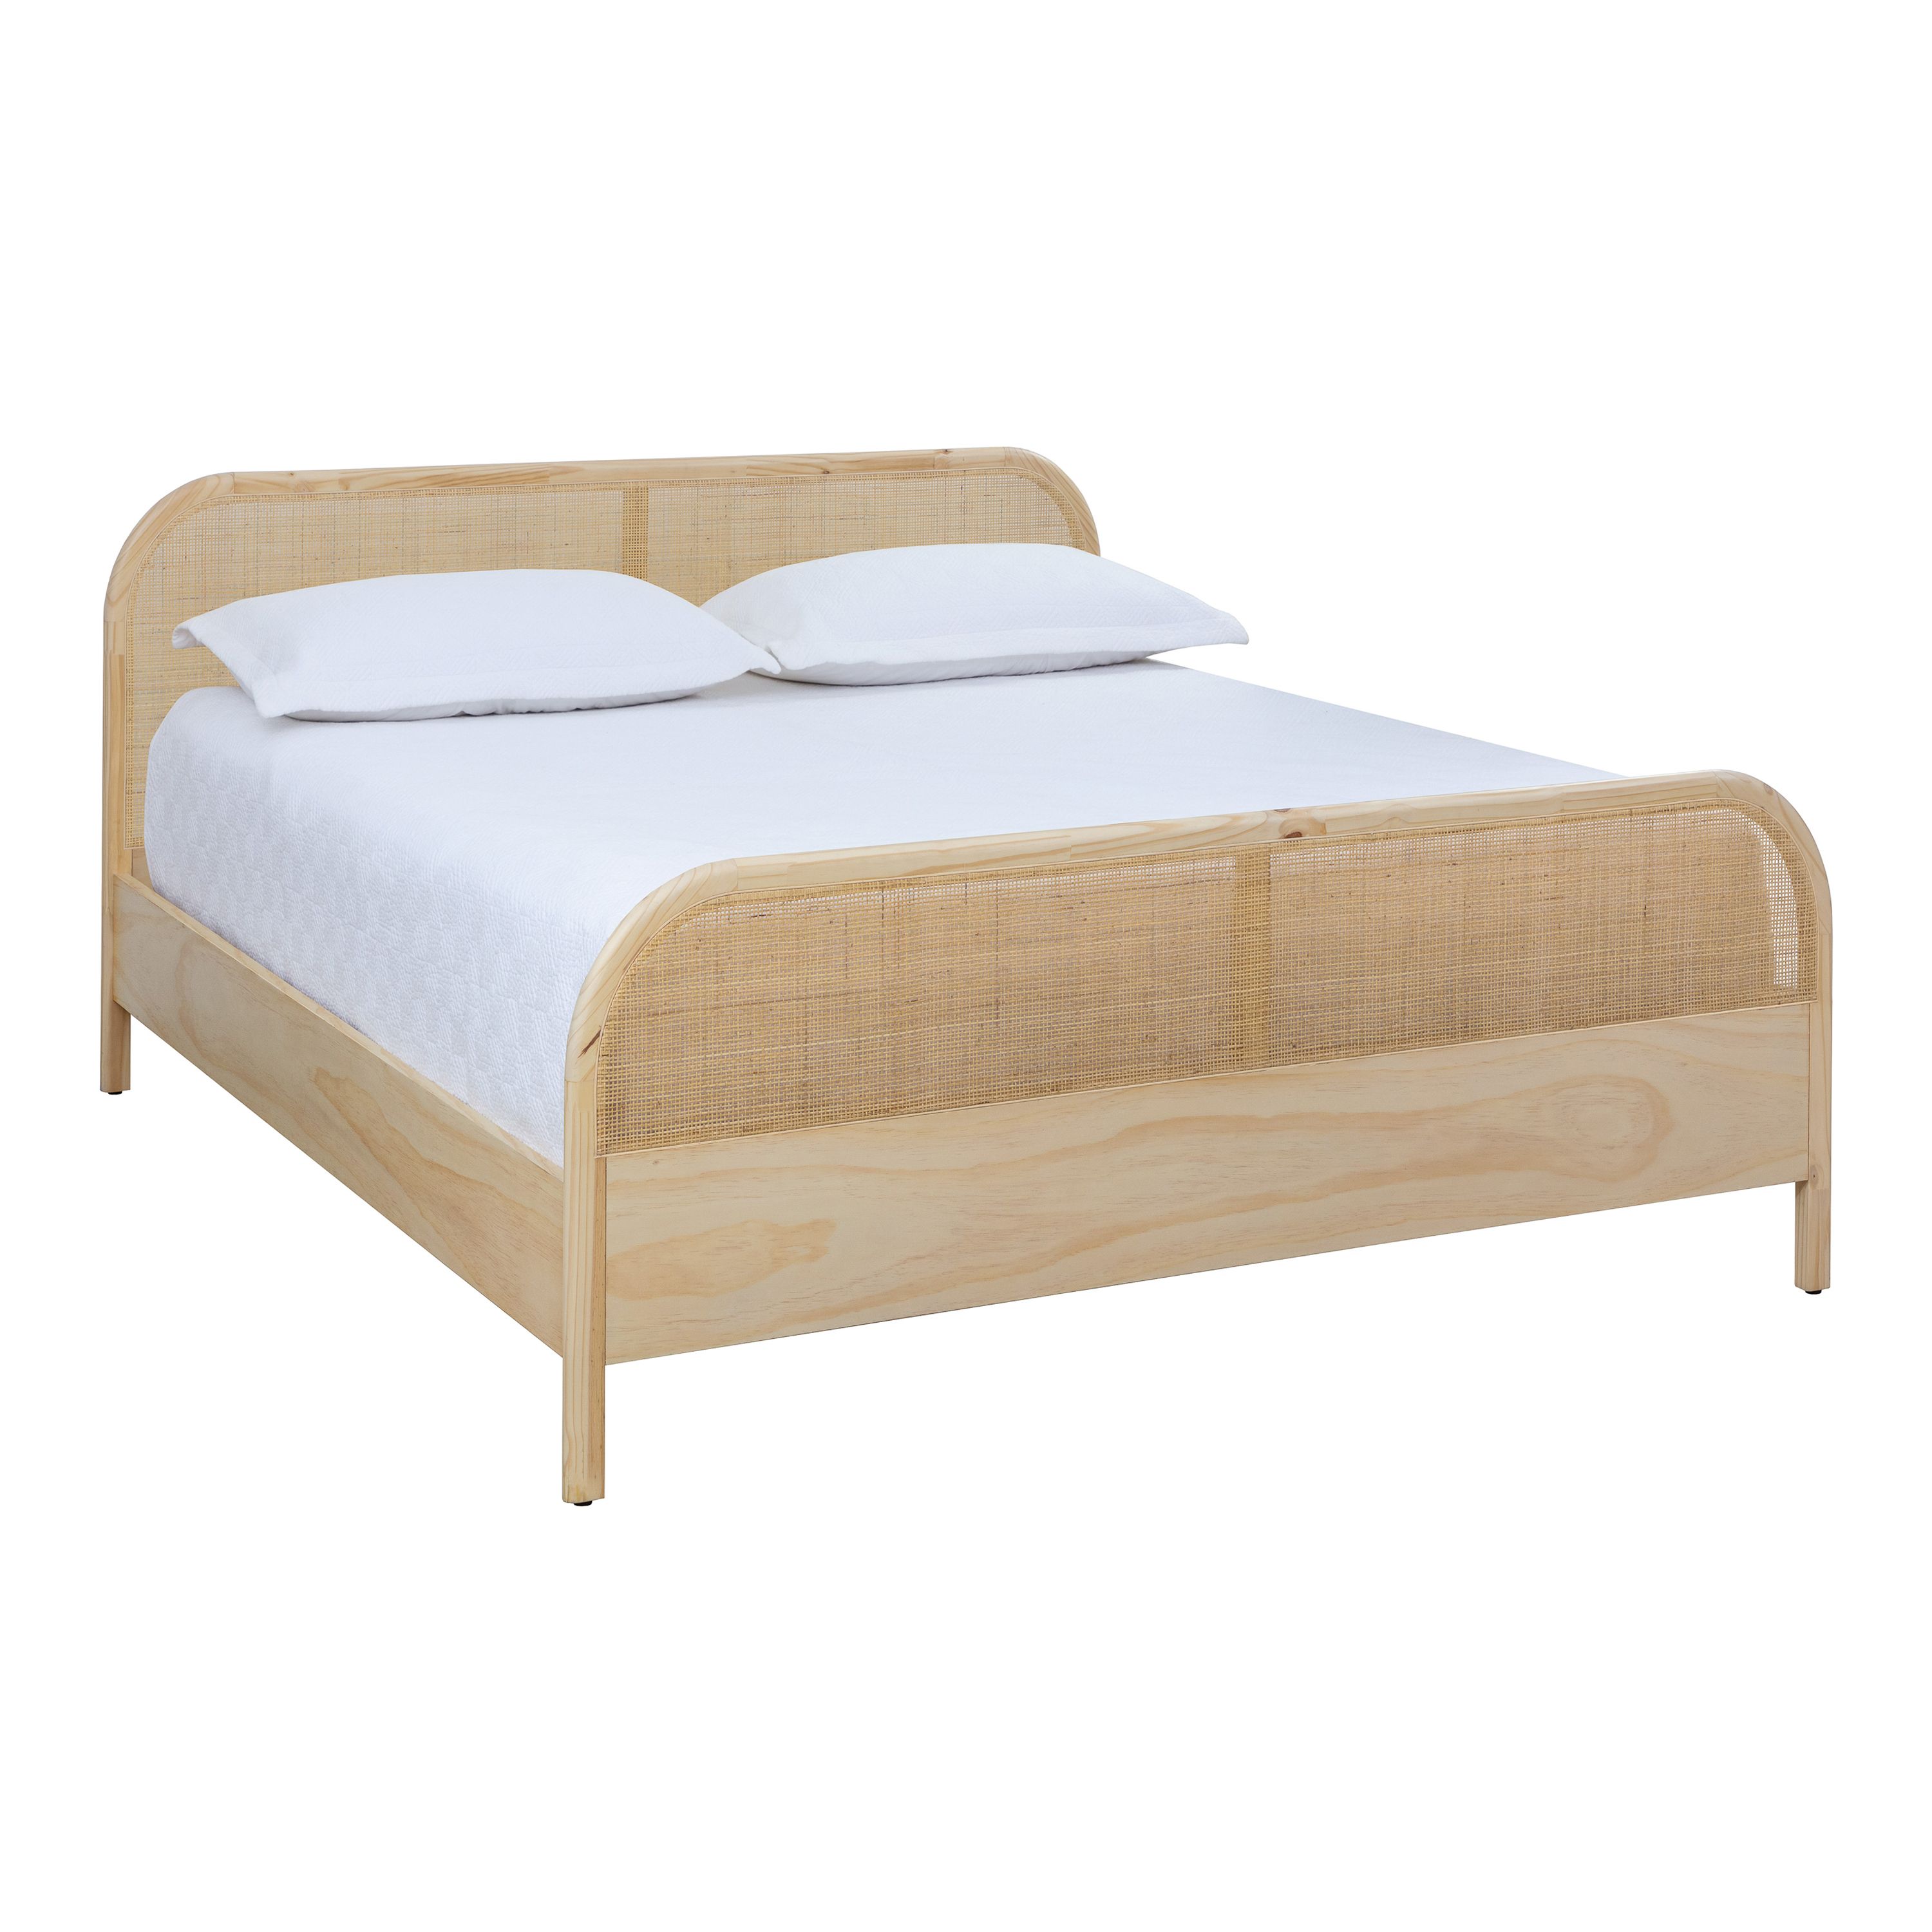 Leith Wood and Rattan Cane Platform Bed | World Market